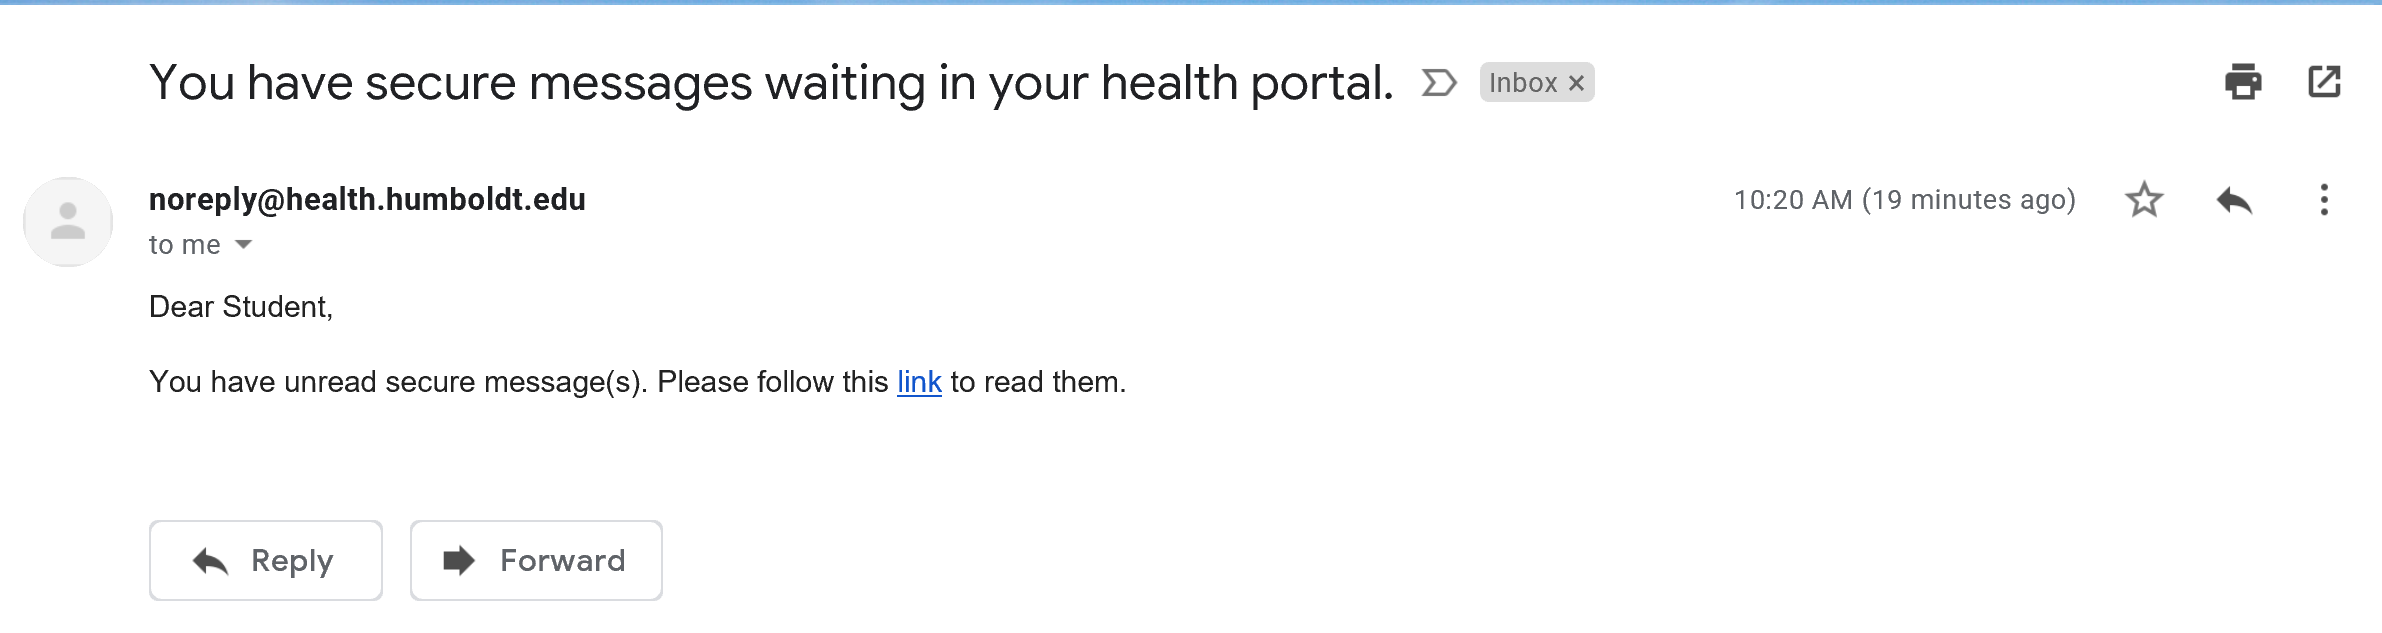 portal message email example